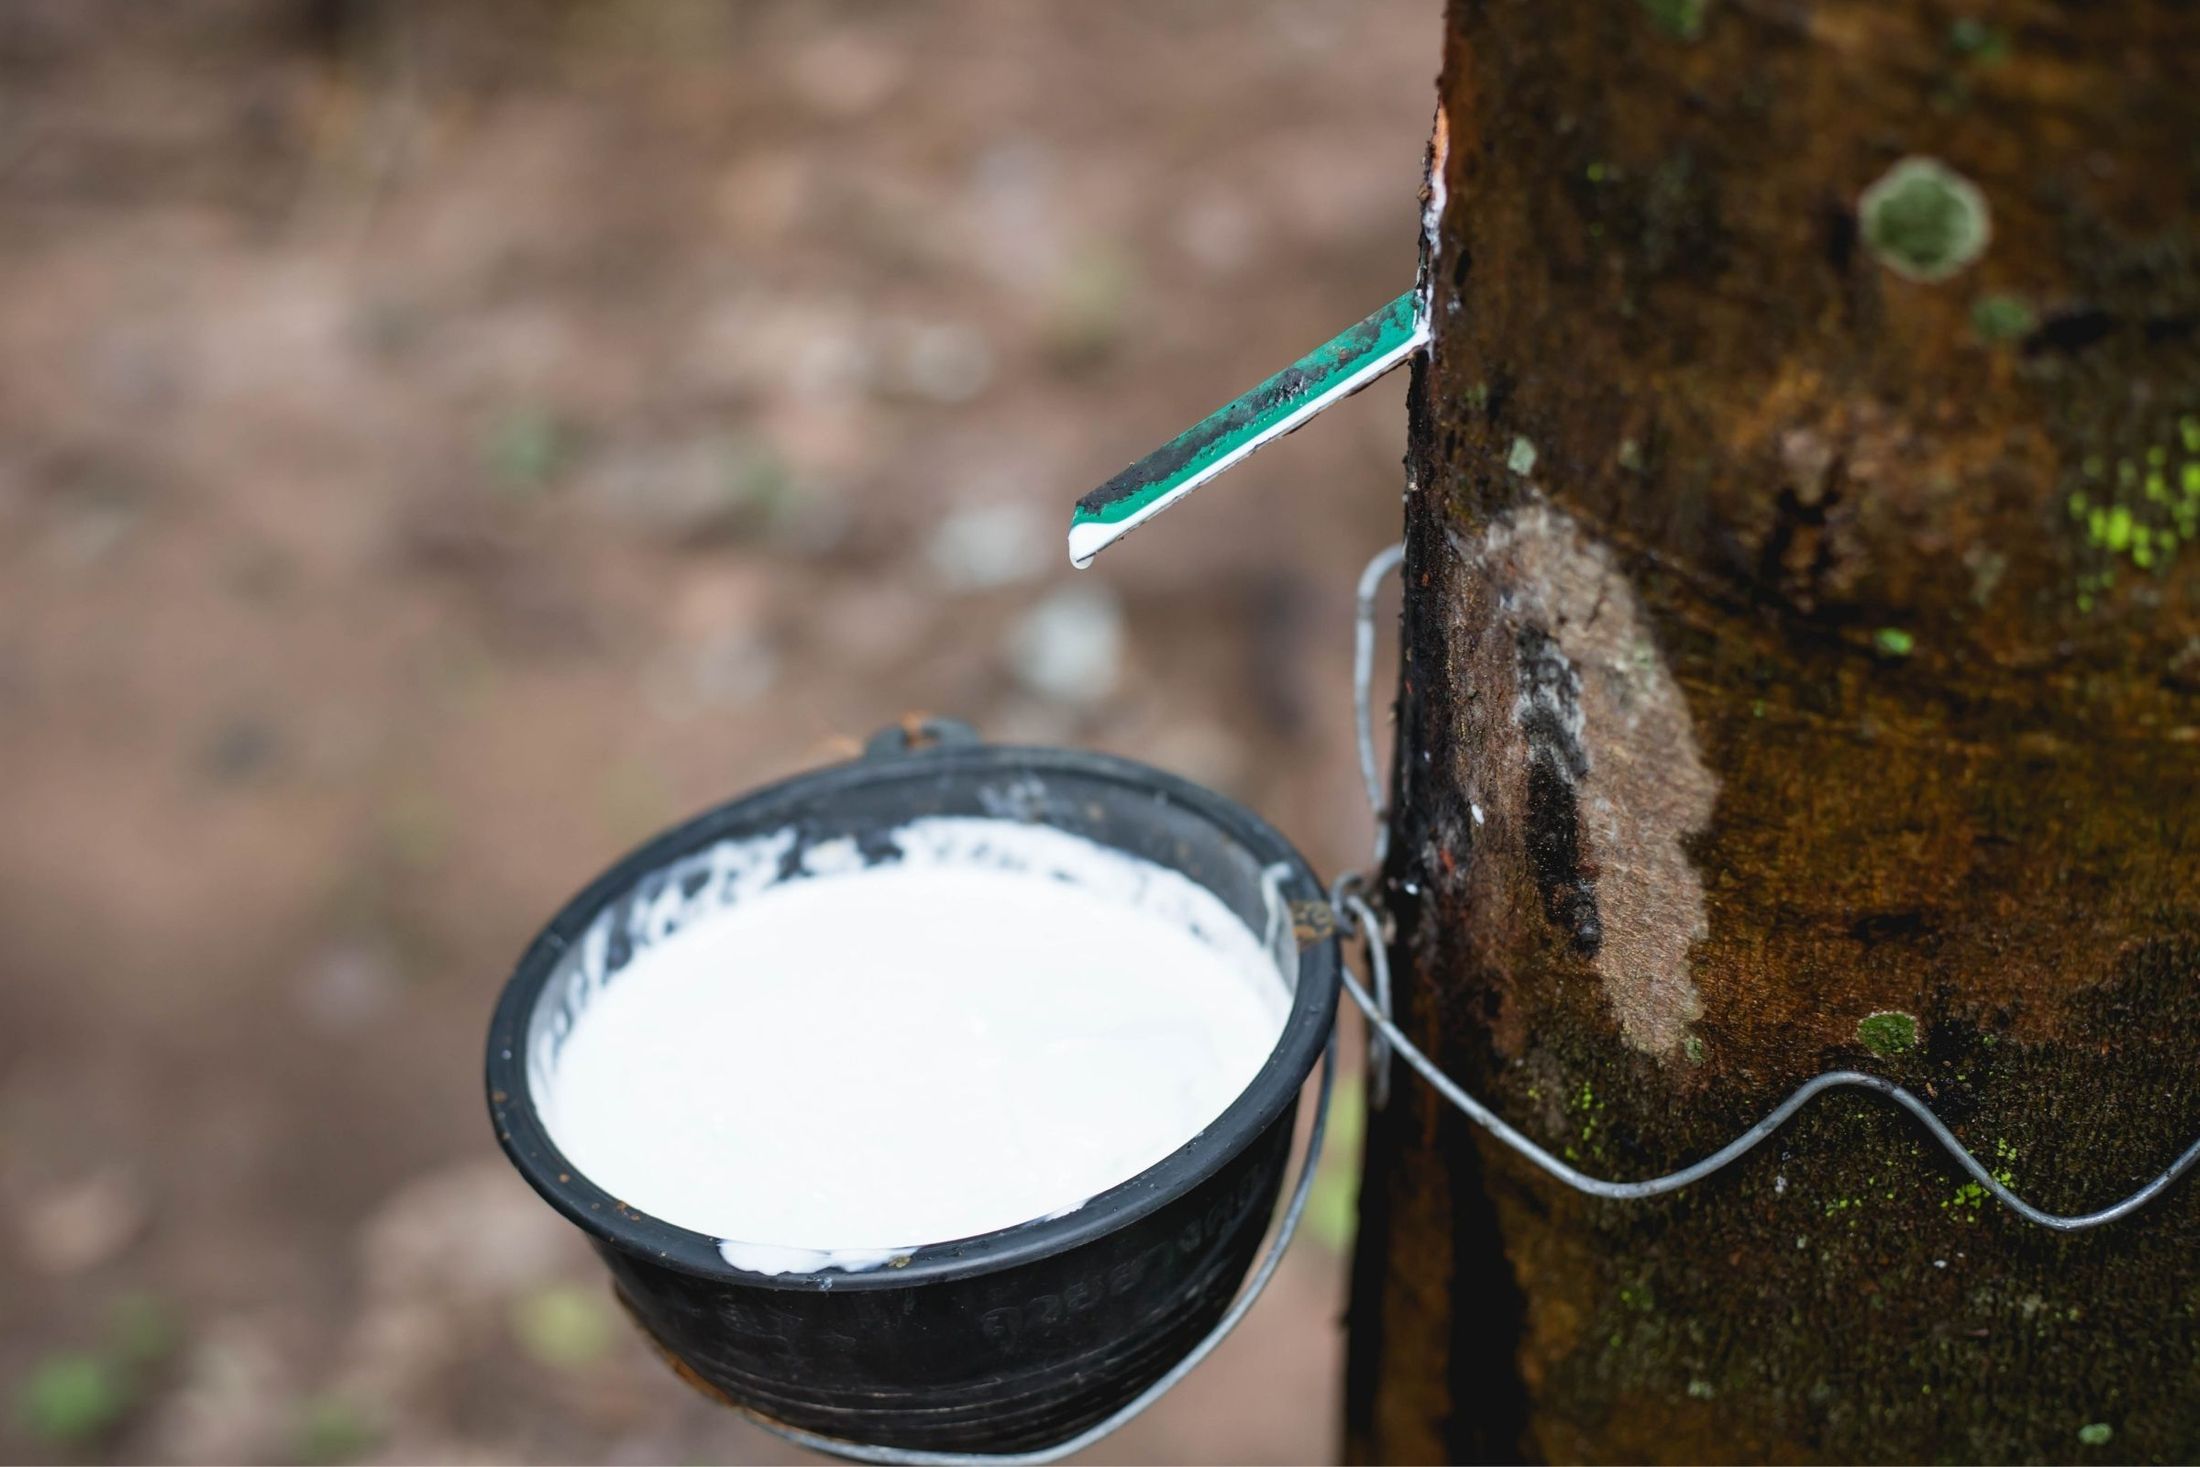 What is natural rubber? - Quora